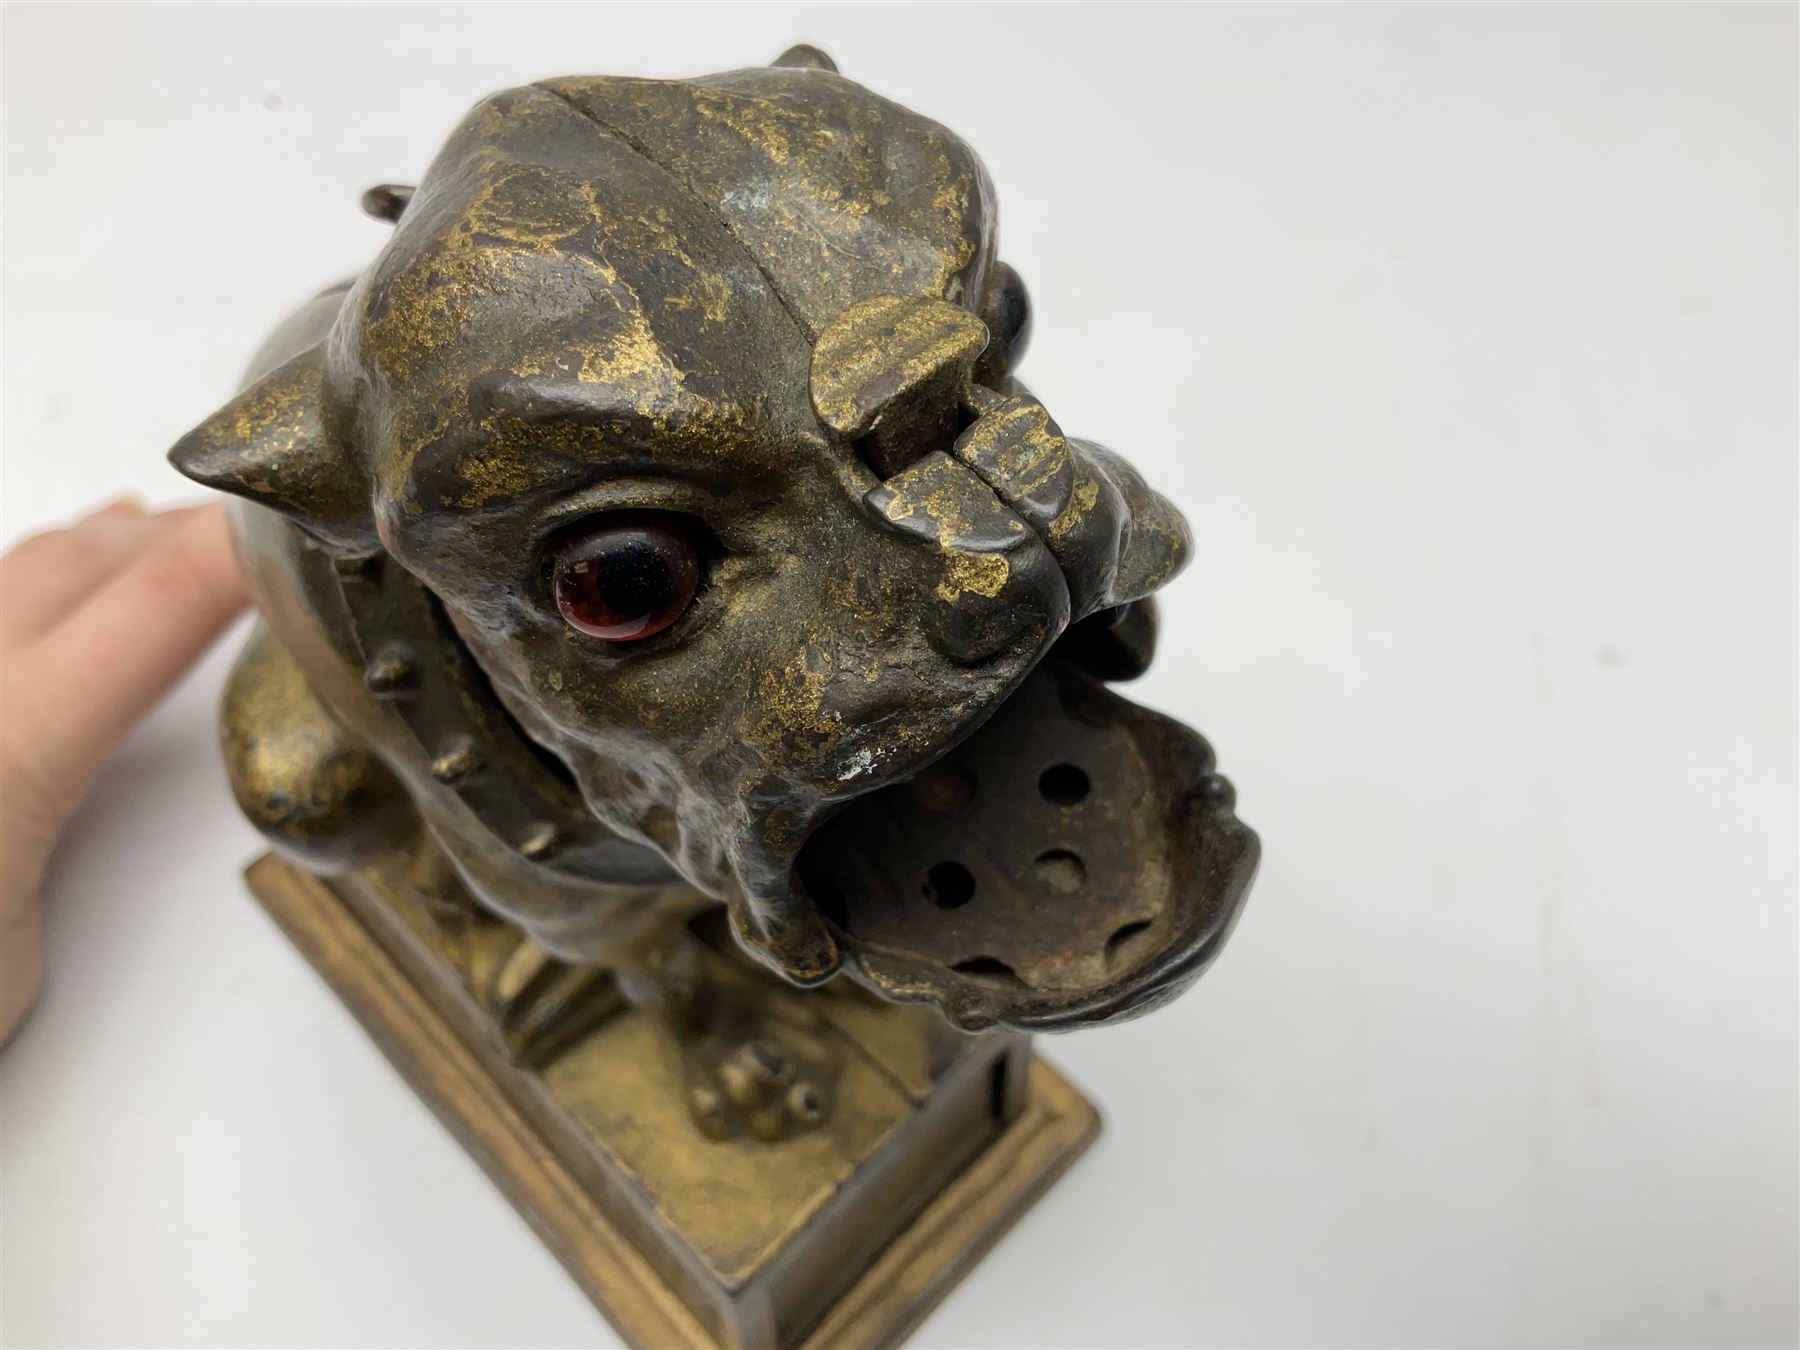 Late 19th century cast-iron mechanical money bank 'Bulldog Bank' by J & E Stevens with coin-on-nose - Image 7 of 8